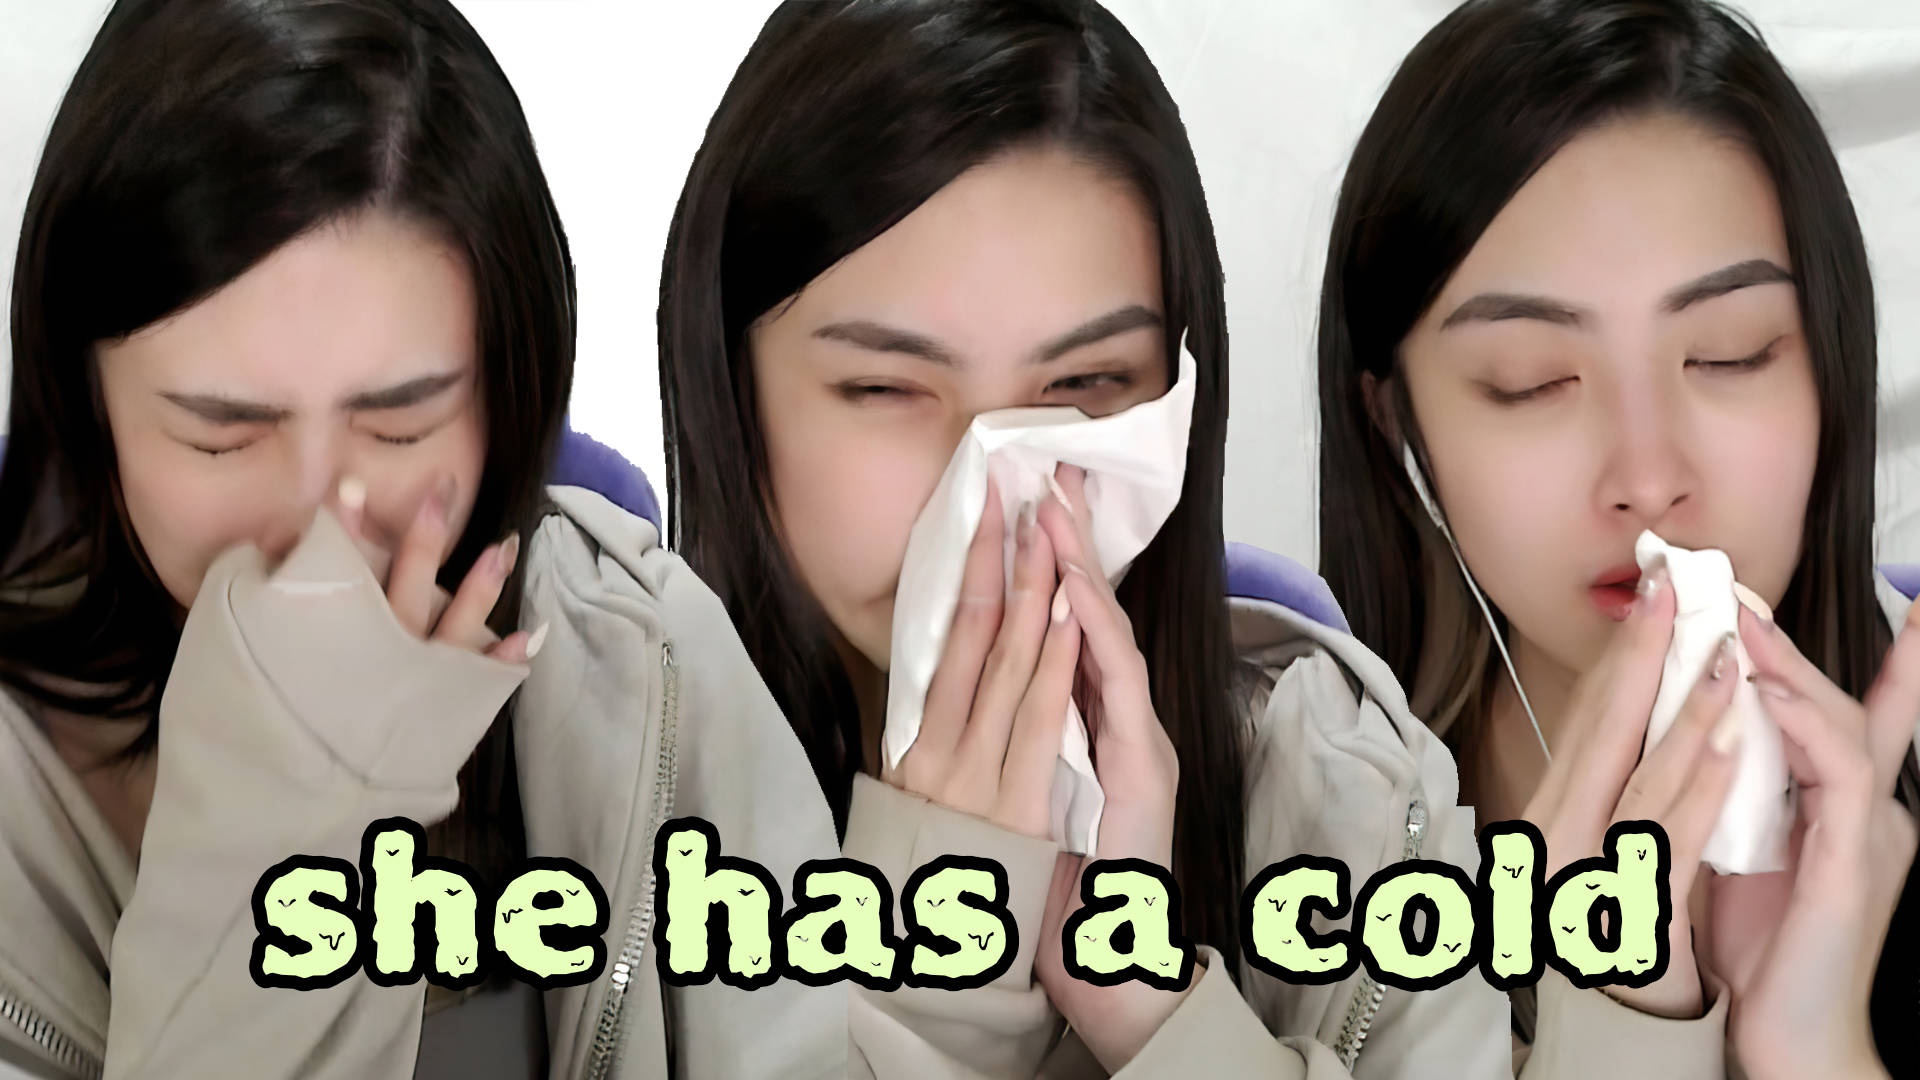 Asian streamer blows her nose while having a cold